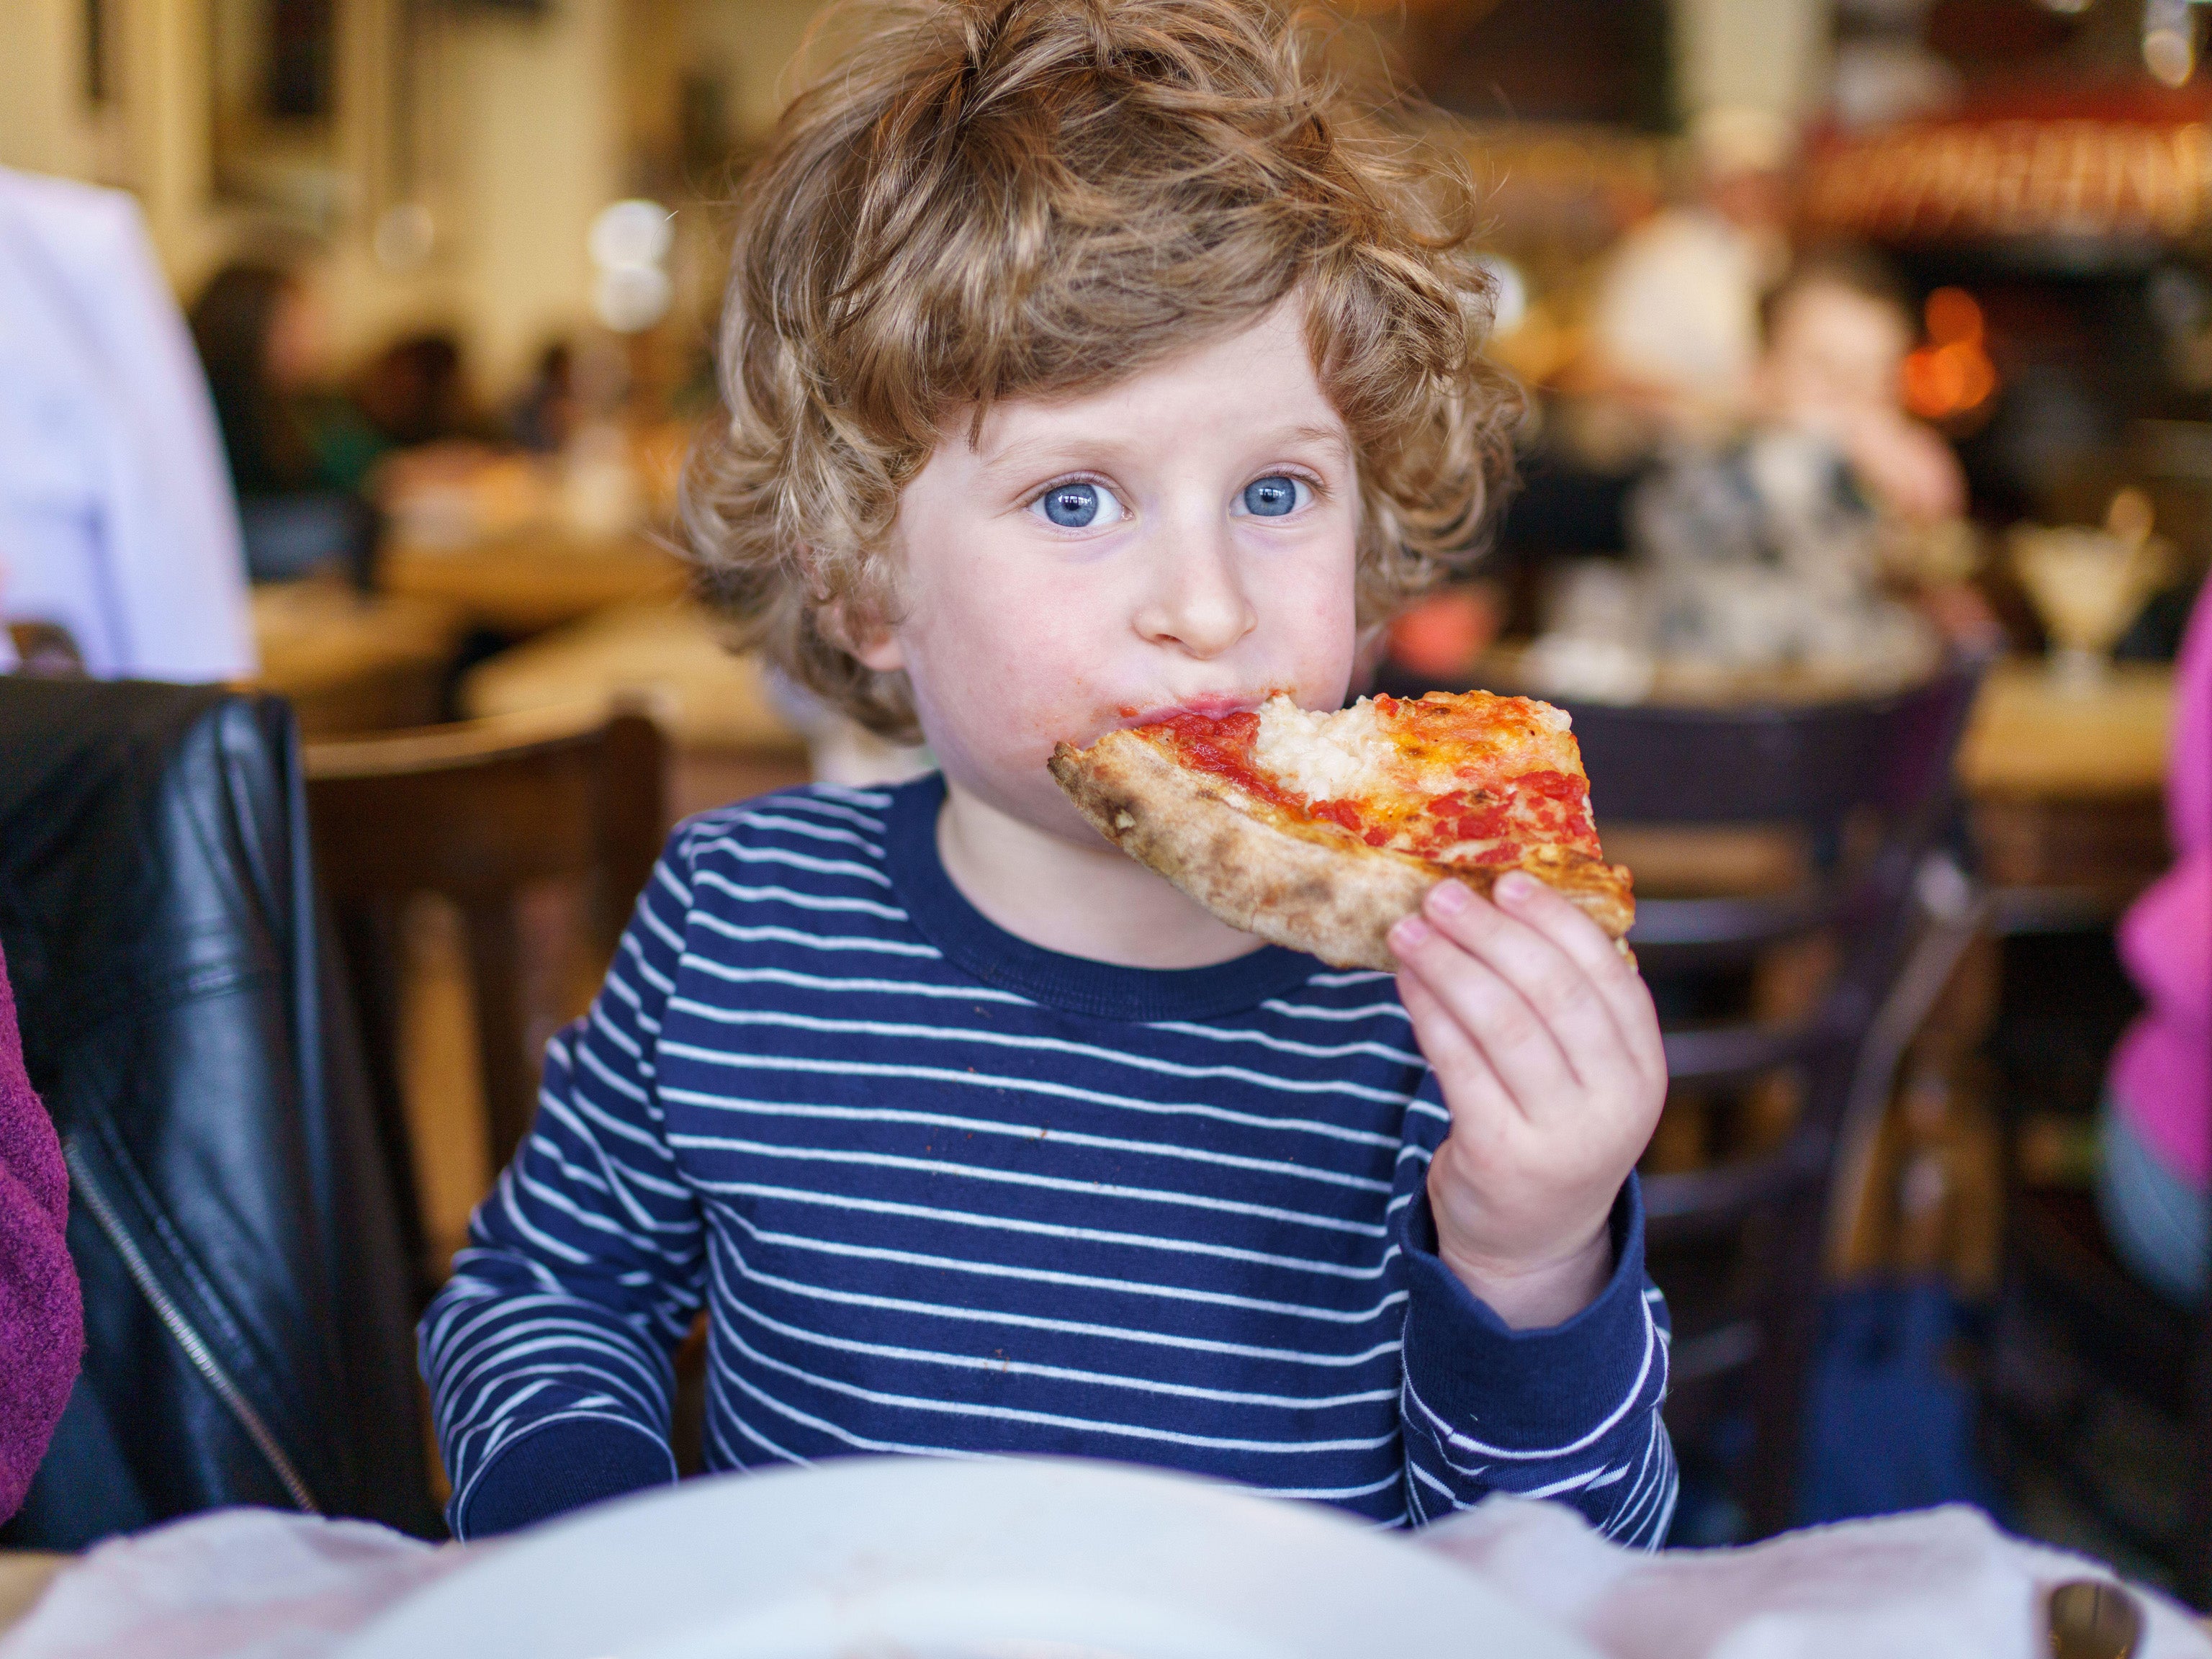 Children can eat free at certain restaurants this Easter